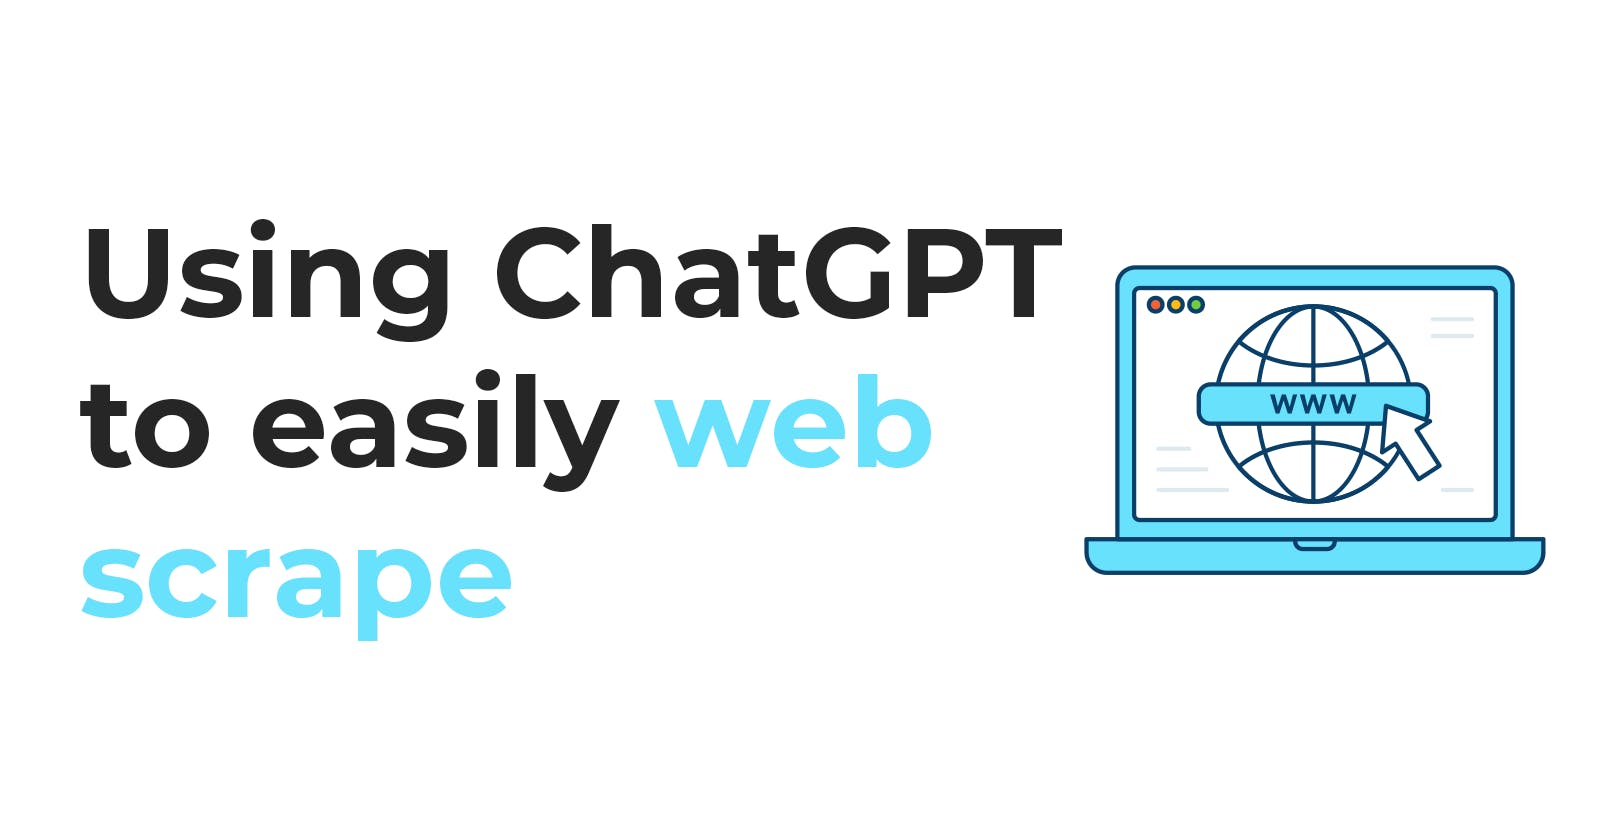 How to use ChatGPT to web scrape EASILY